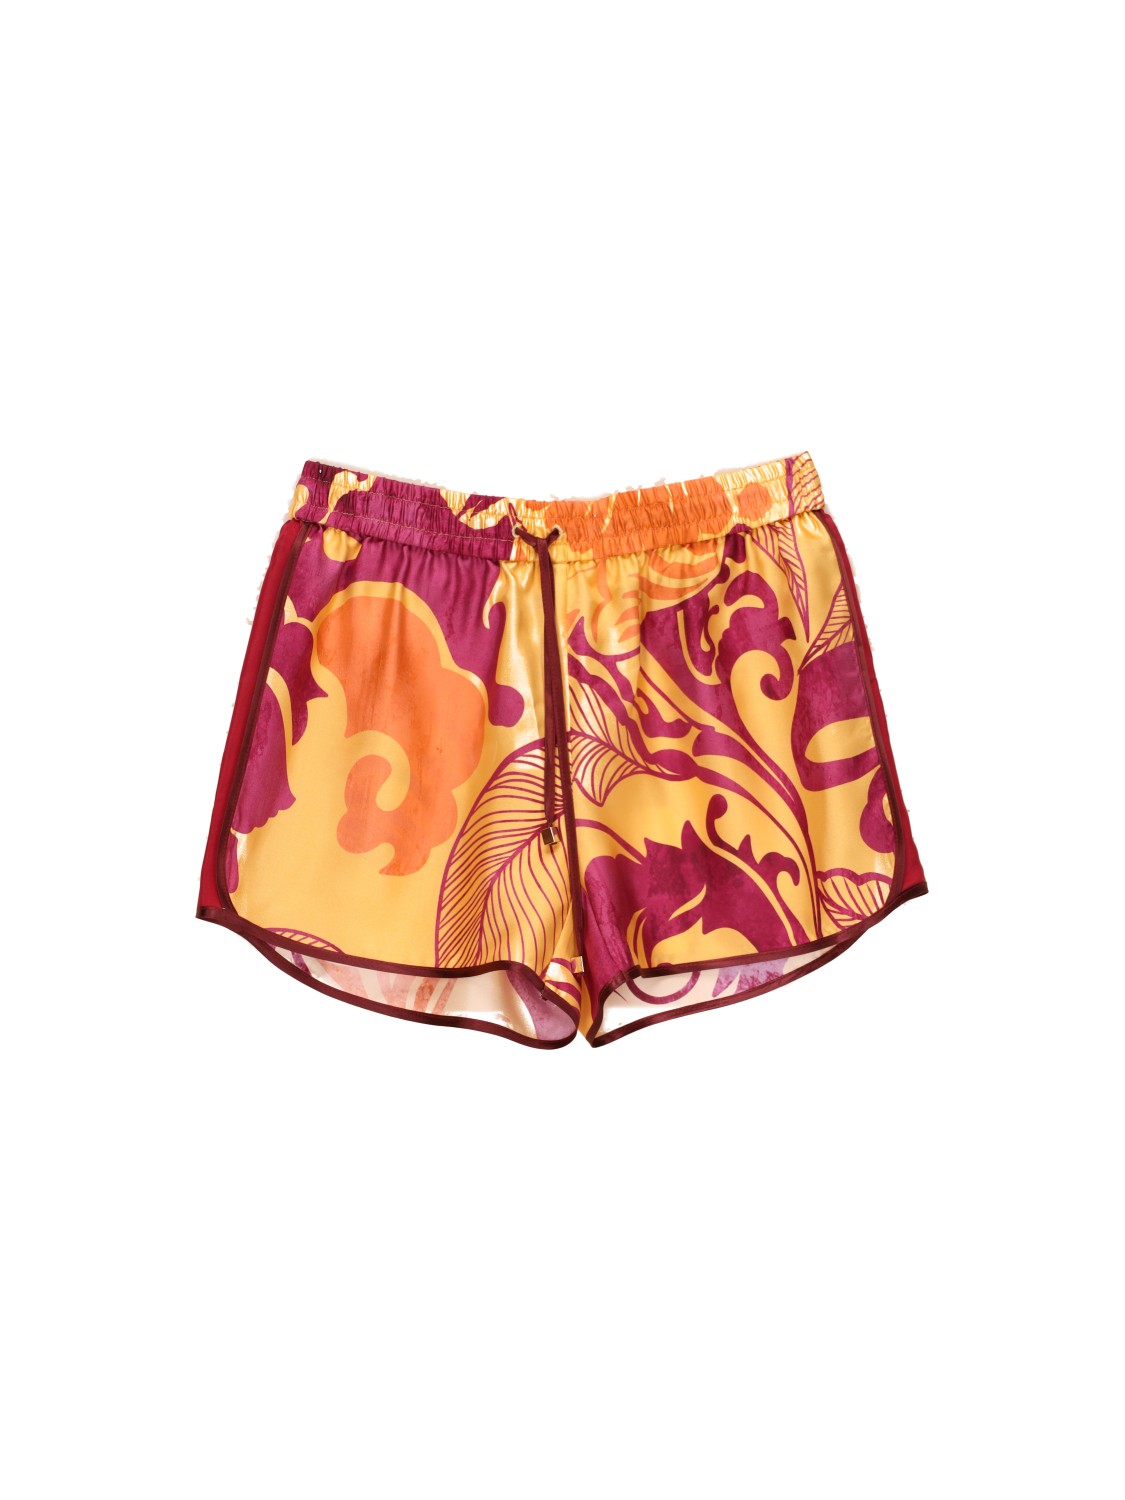 Silk shorts with floral design 